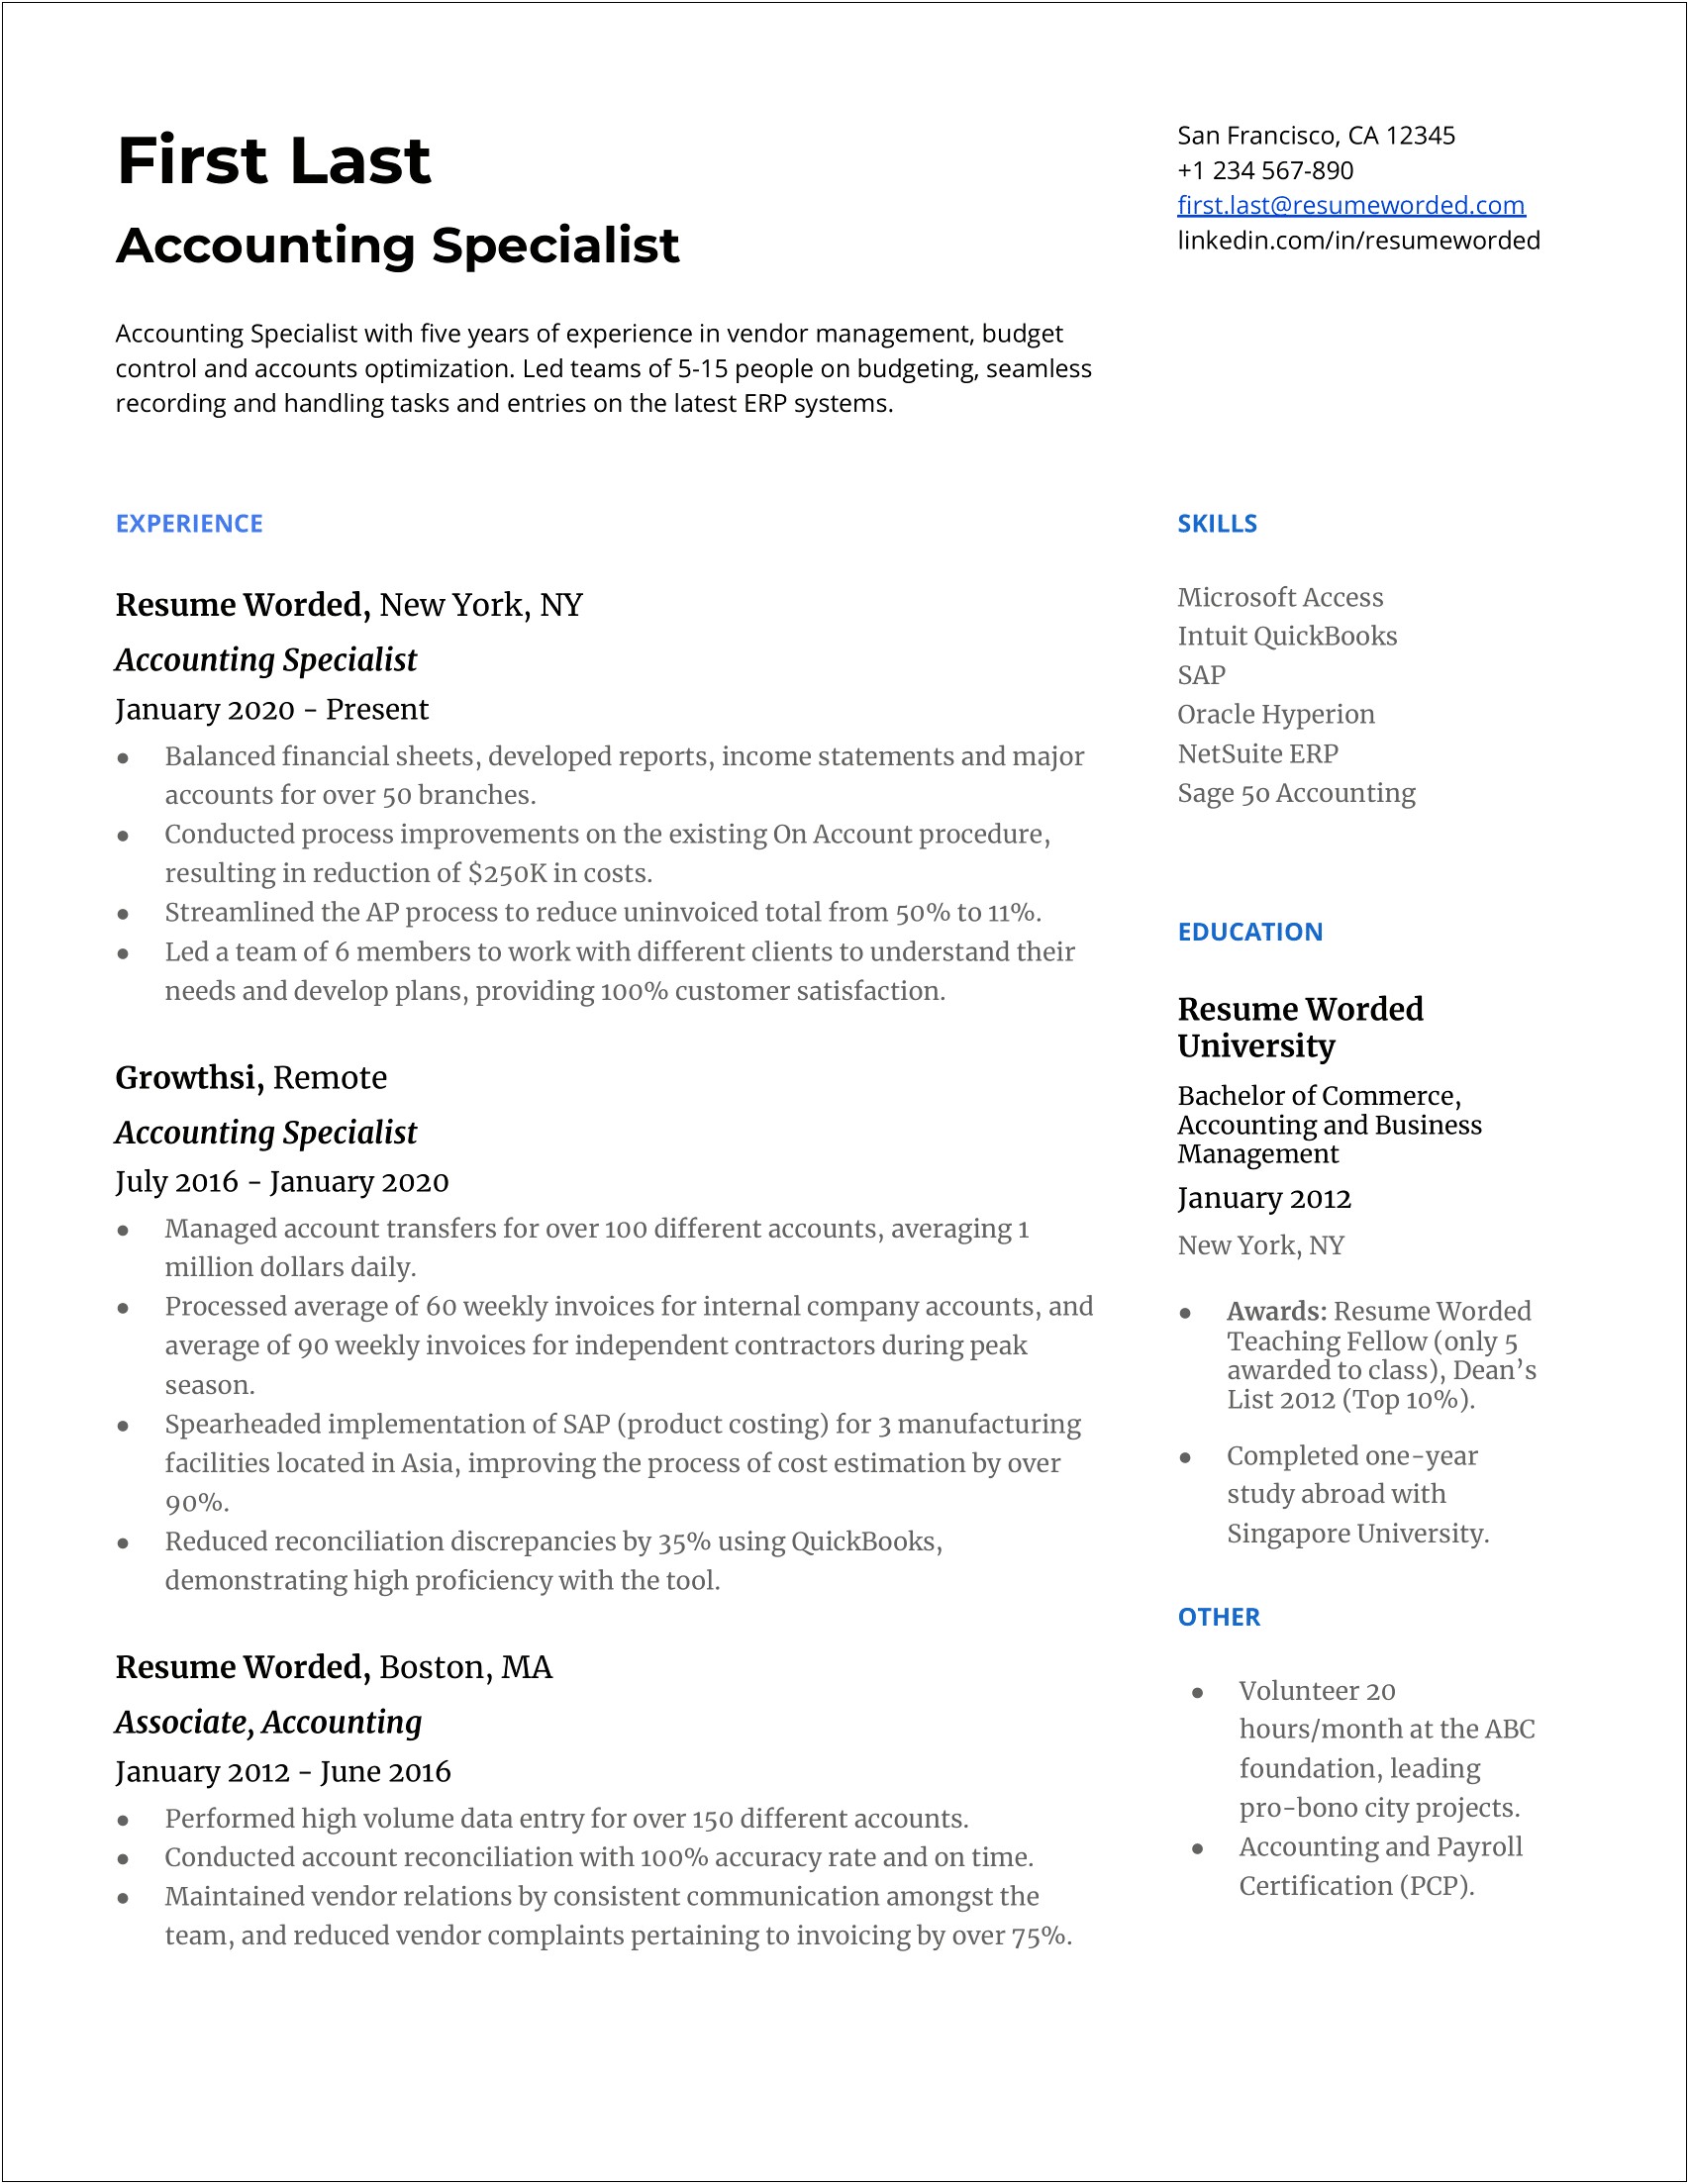 Sample Accounting Resume With Skills Section